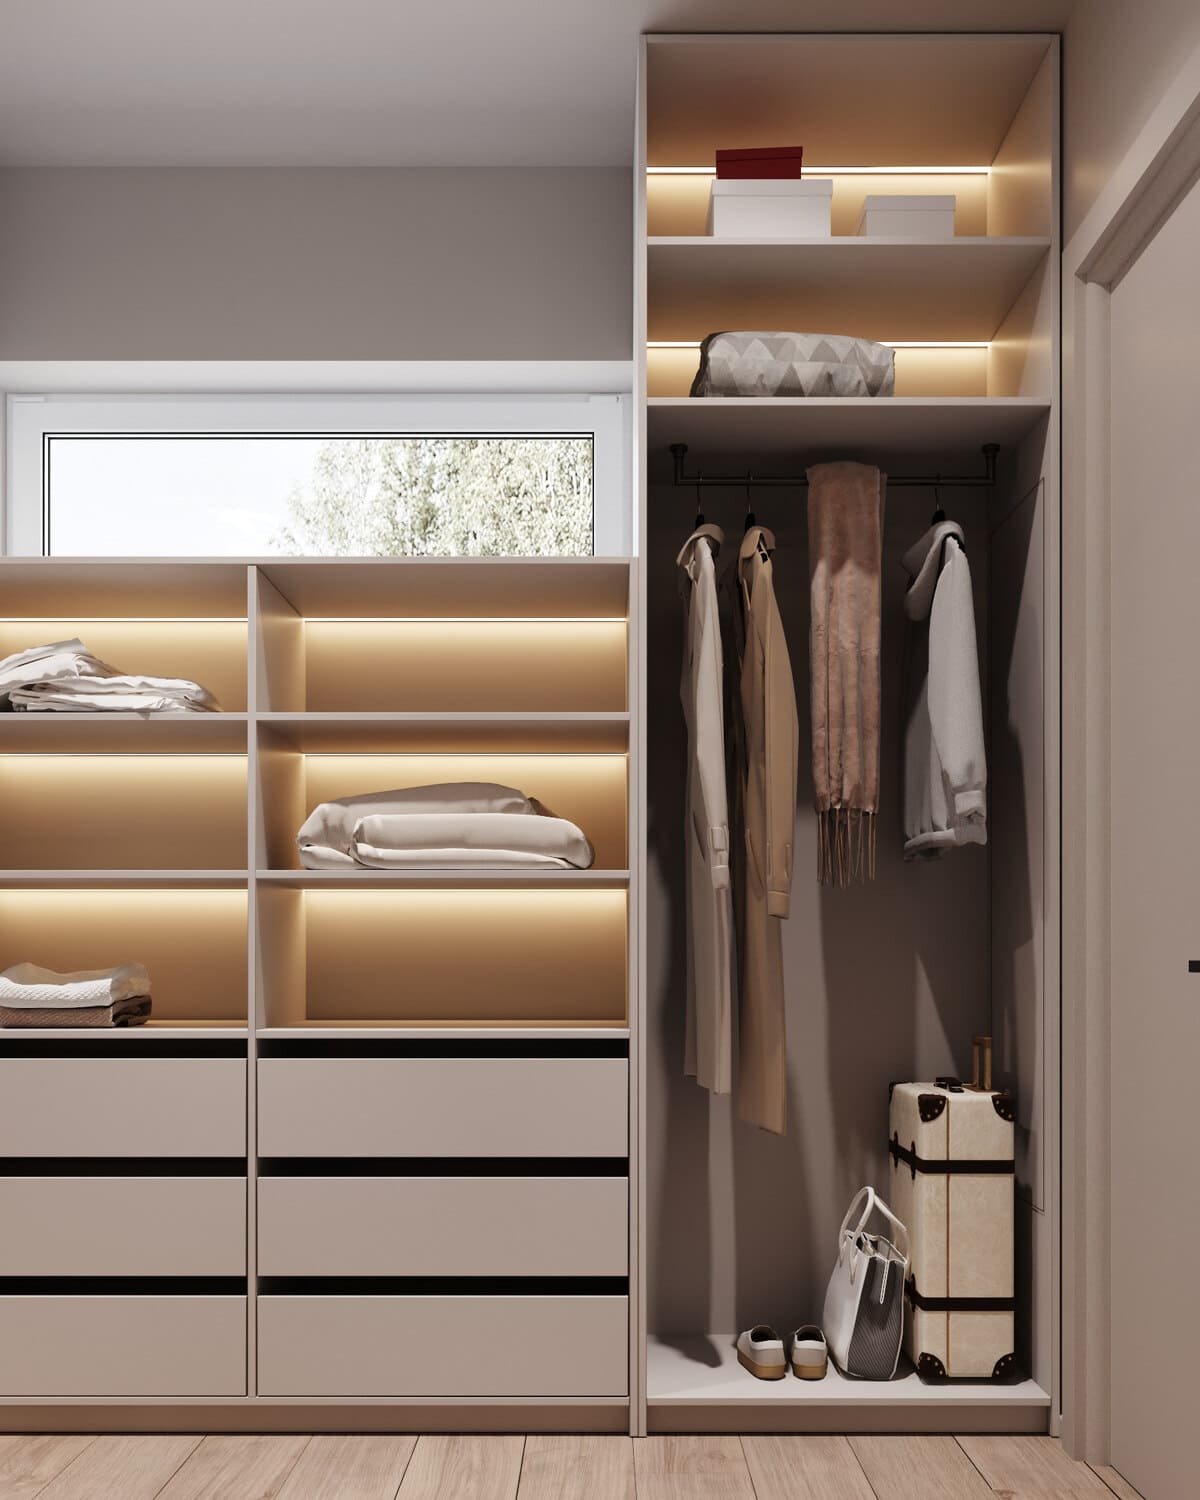 Aesthetic apartment for a young family, wardrobe, photo 12